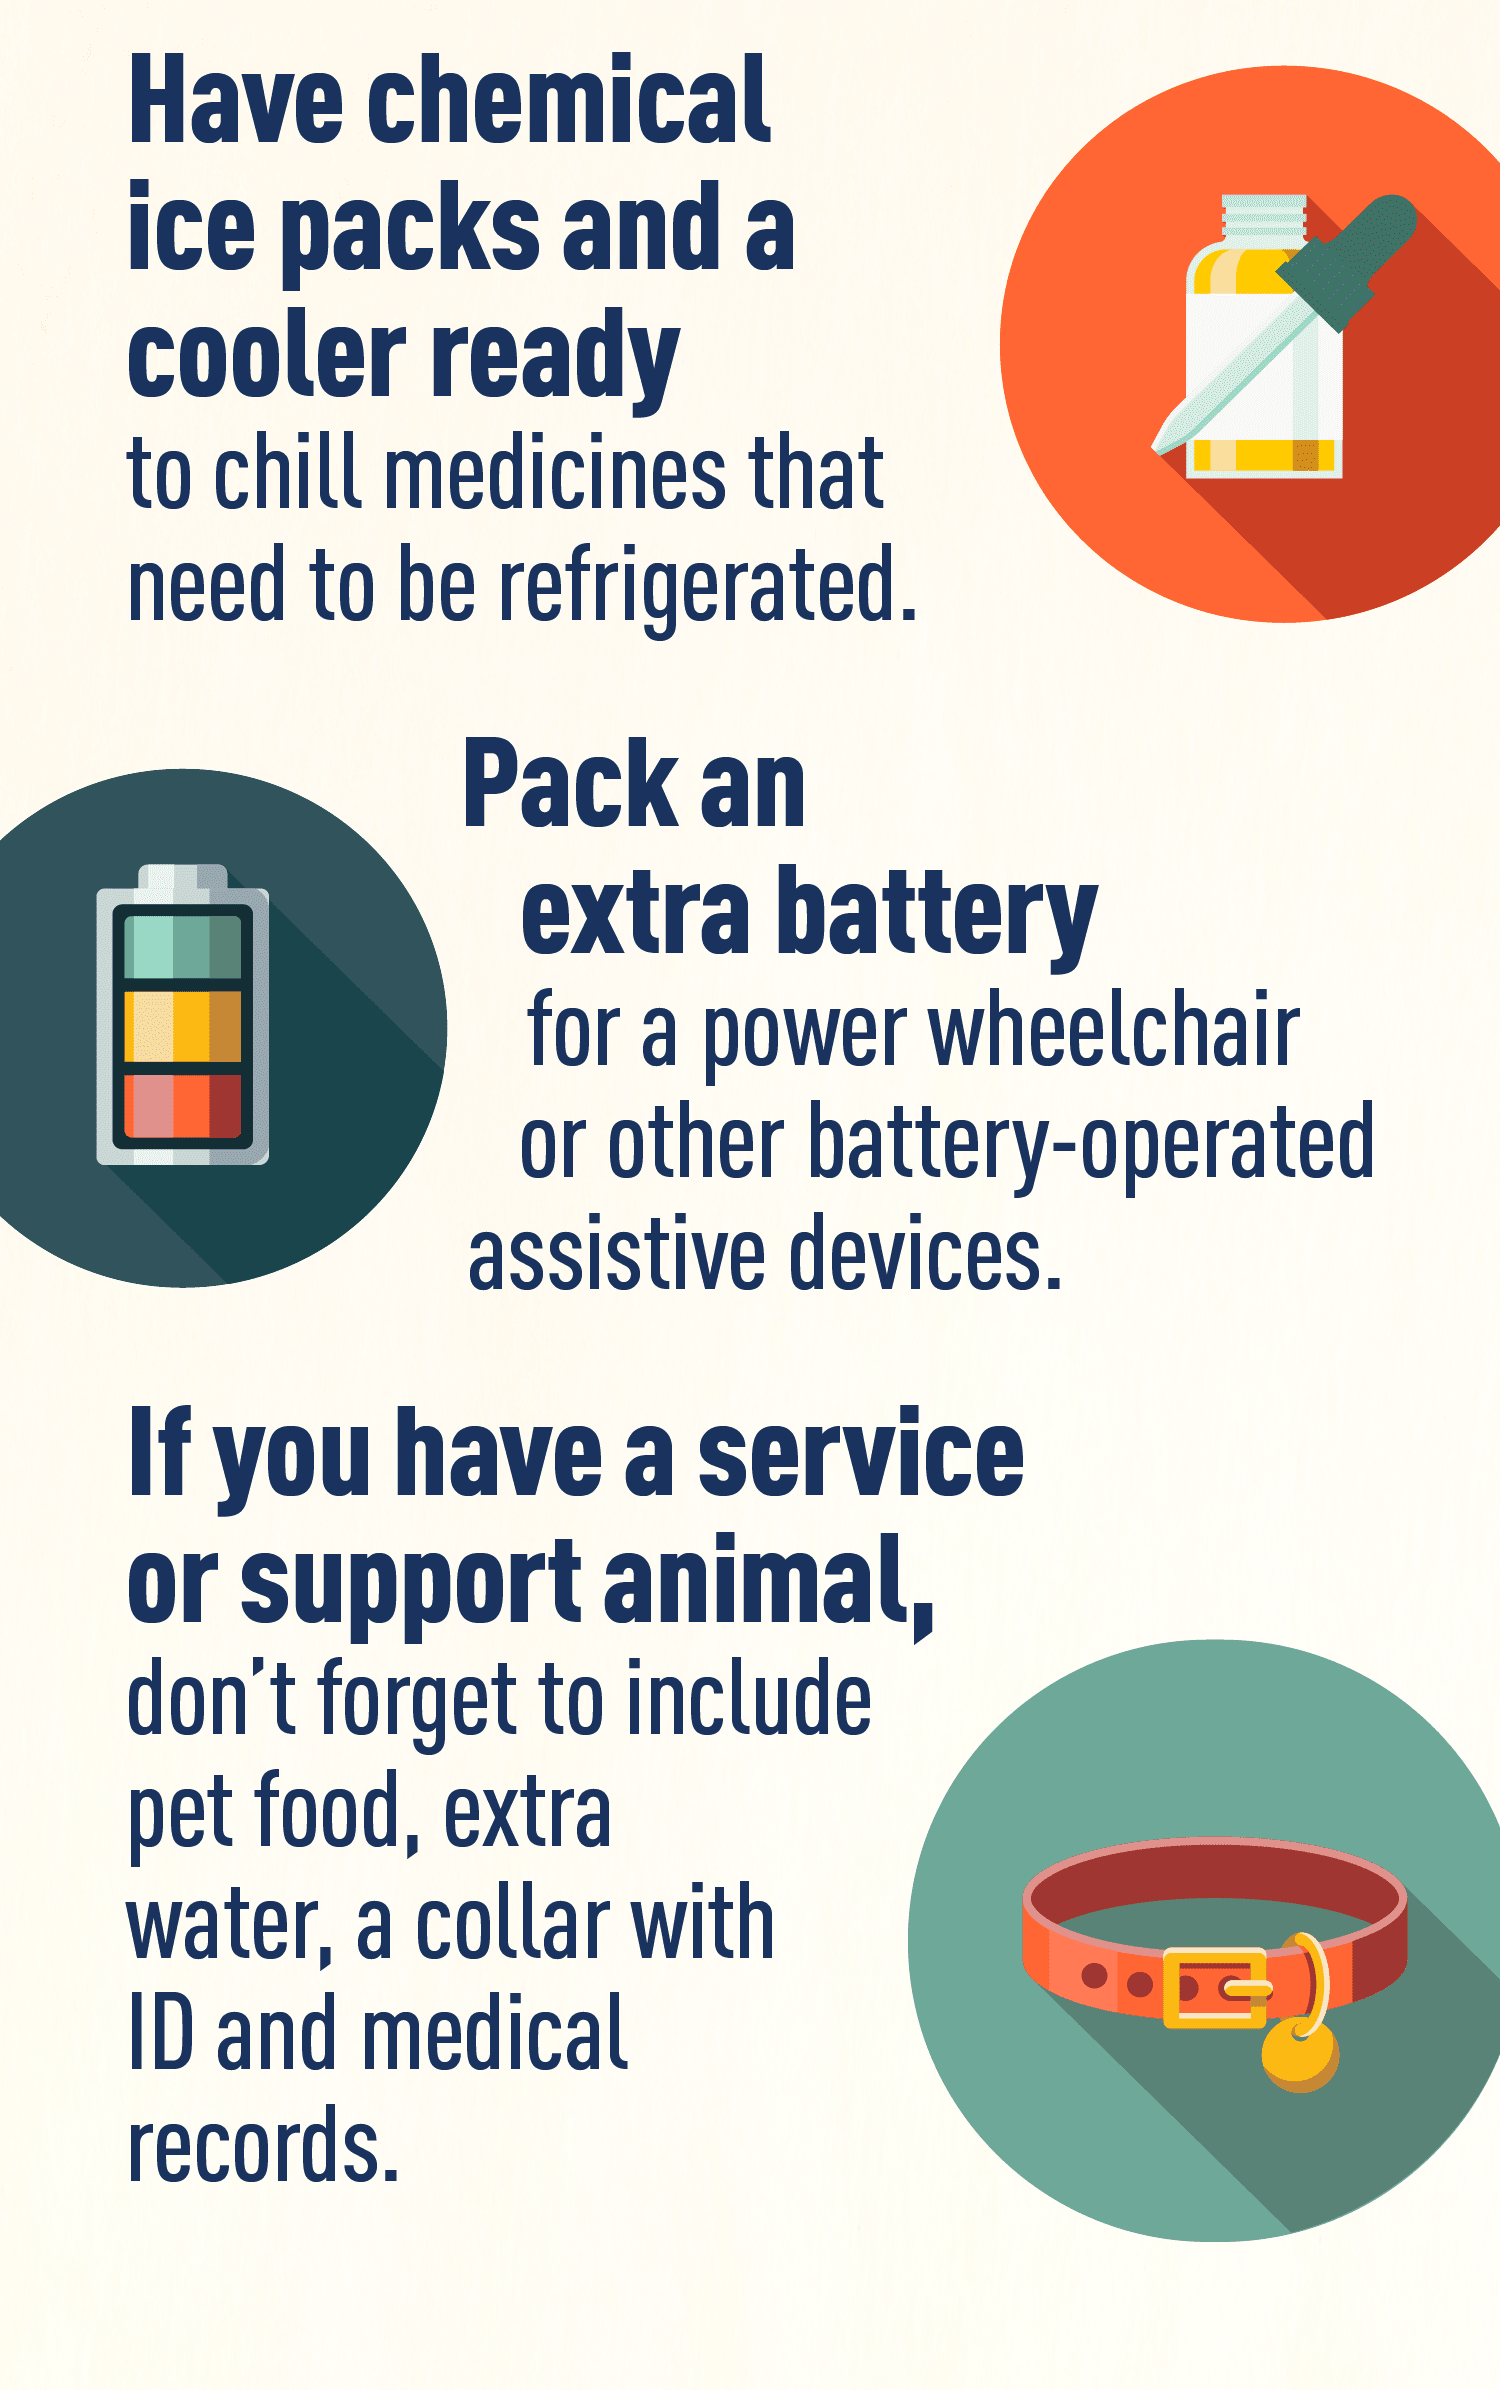 Images: Graphic of medicine jar, battery, and pet collar. Text: Have chemical ice packs and a cooler ready to chill medicines that need to be refrigerated. Pack an extra batterv for a power wheelchair or other battery-operated assistive devices. If you have a service or support animal, don't forget to include pet food, extra water. a collar with ID and medical records.